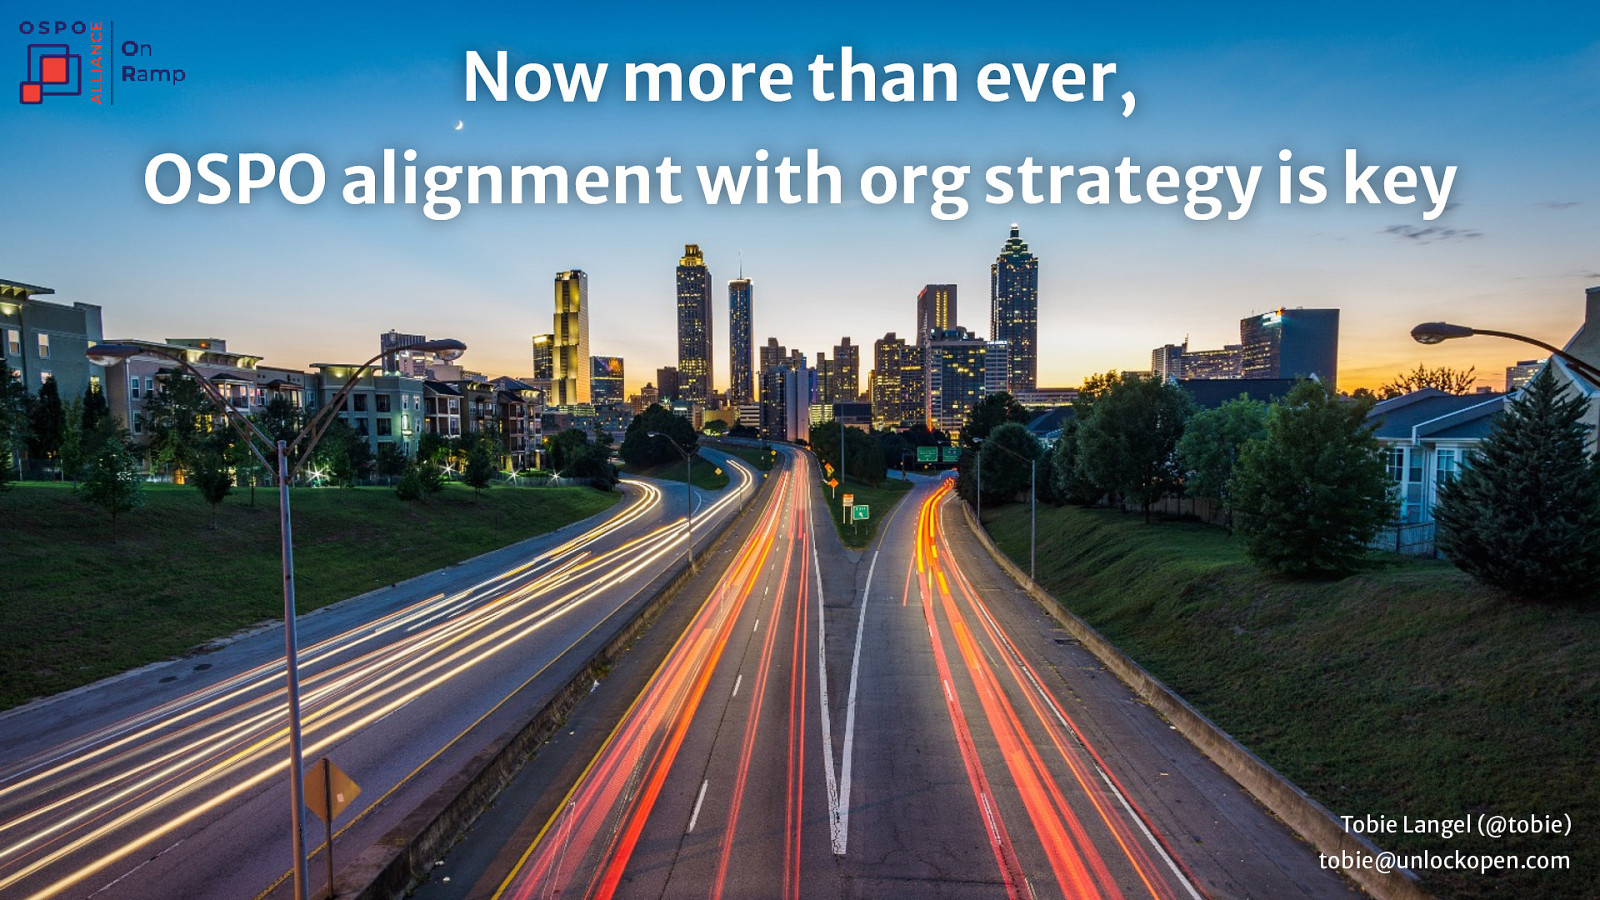 Now more than ever, OSPO alignment with org strategy is key